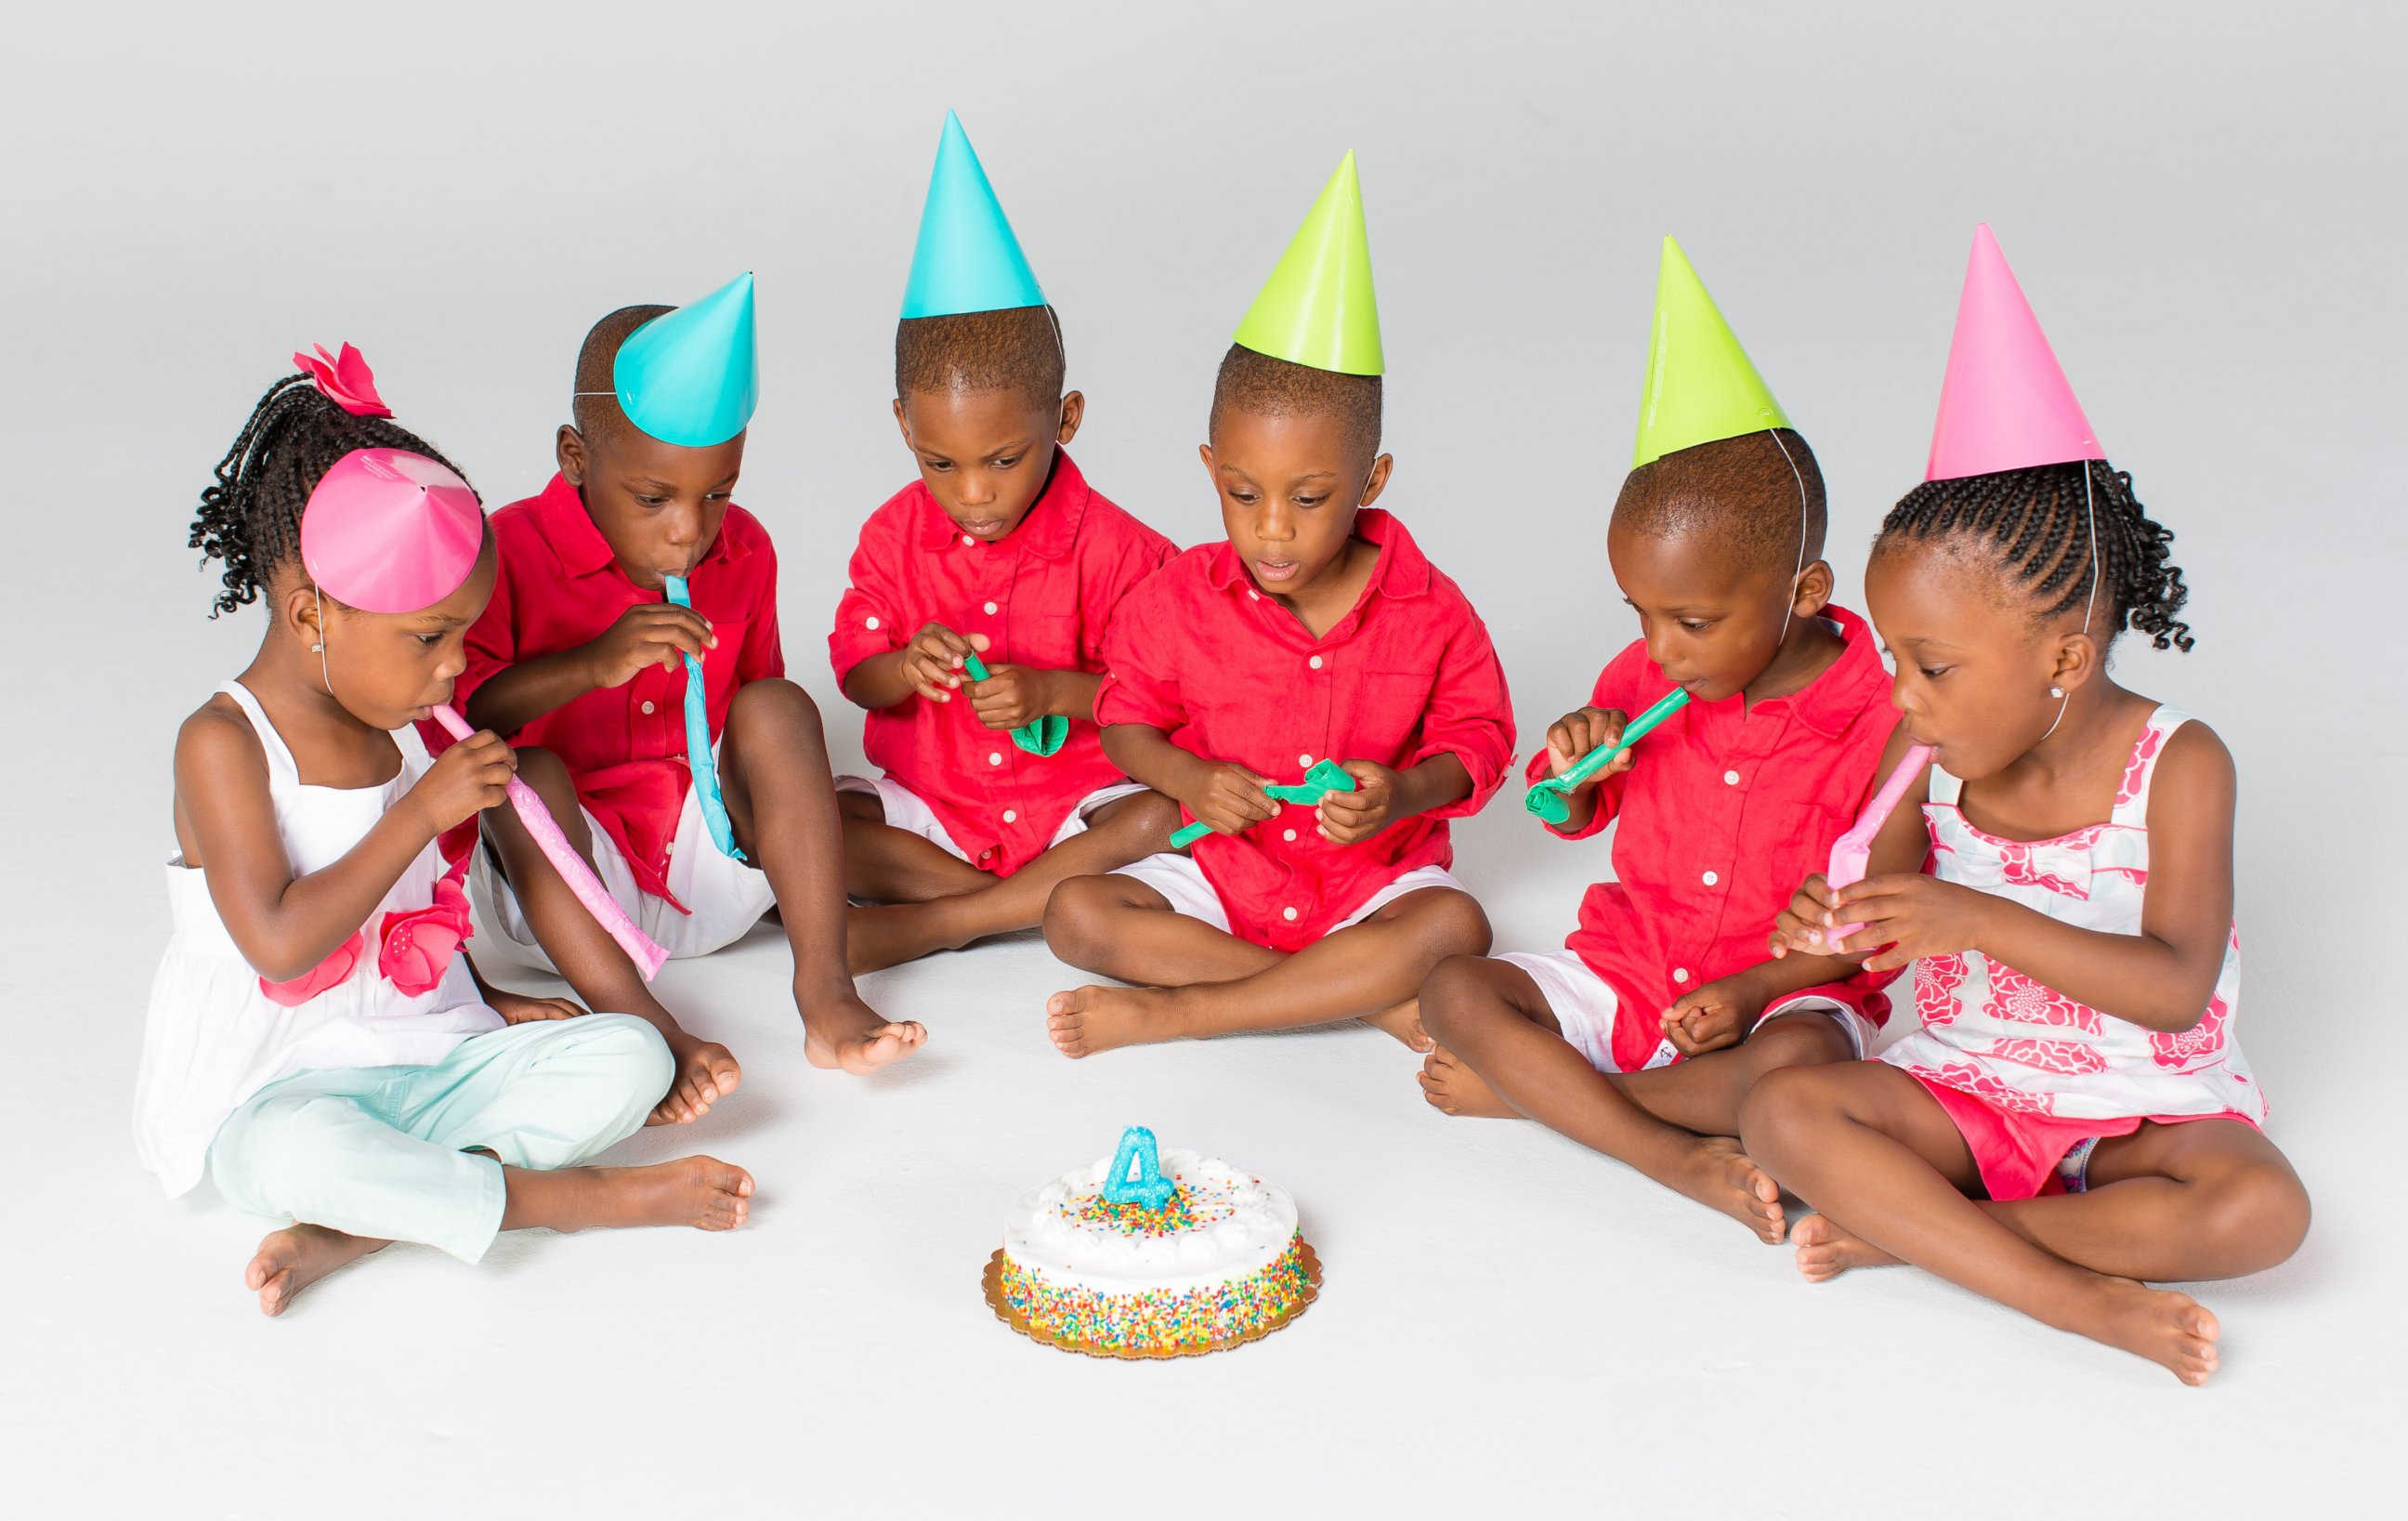 PHOTO: Mia and Rozonno (Ro) McGhee with the McGhee sextuplets from "Six Little McGhees" celebrate their 4th birthday.